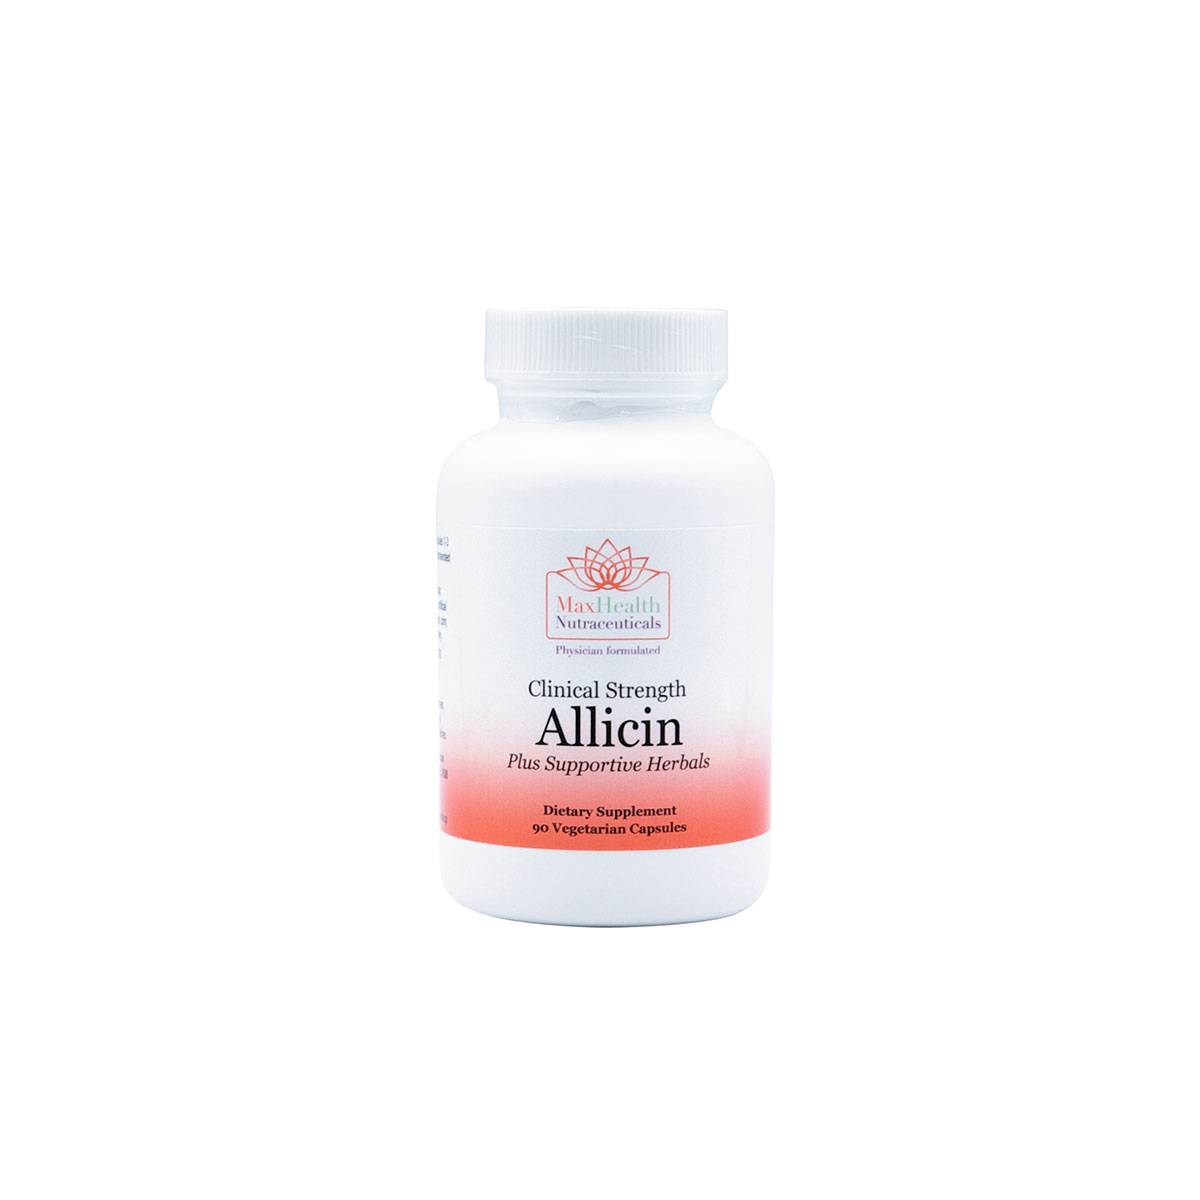 11Clinical Strength Allicin plus Supportive Herbals - MaxLiving